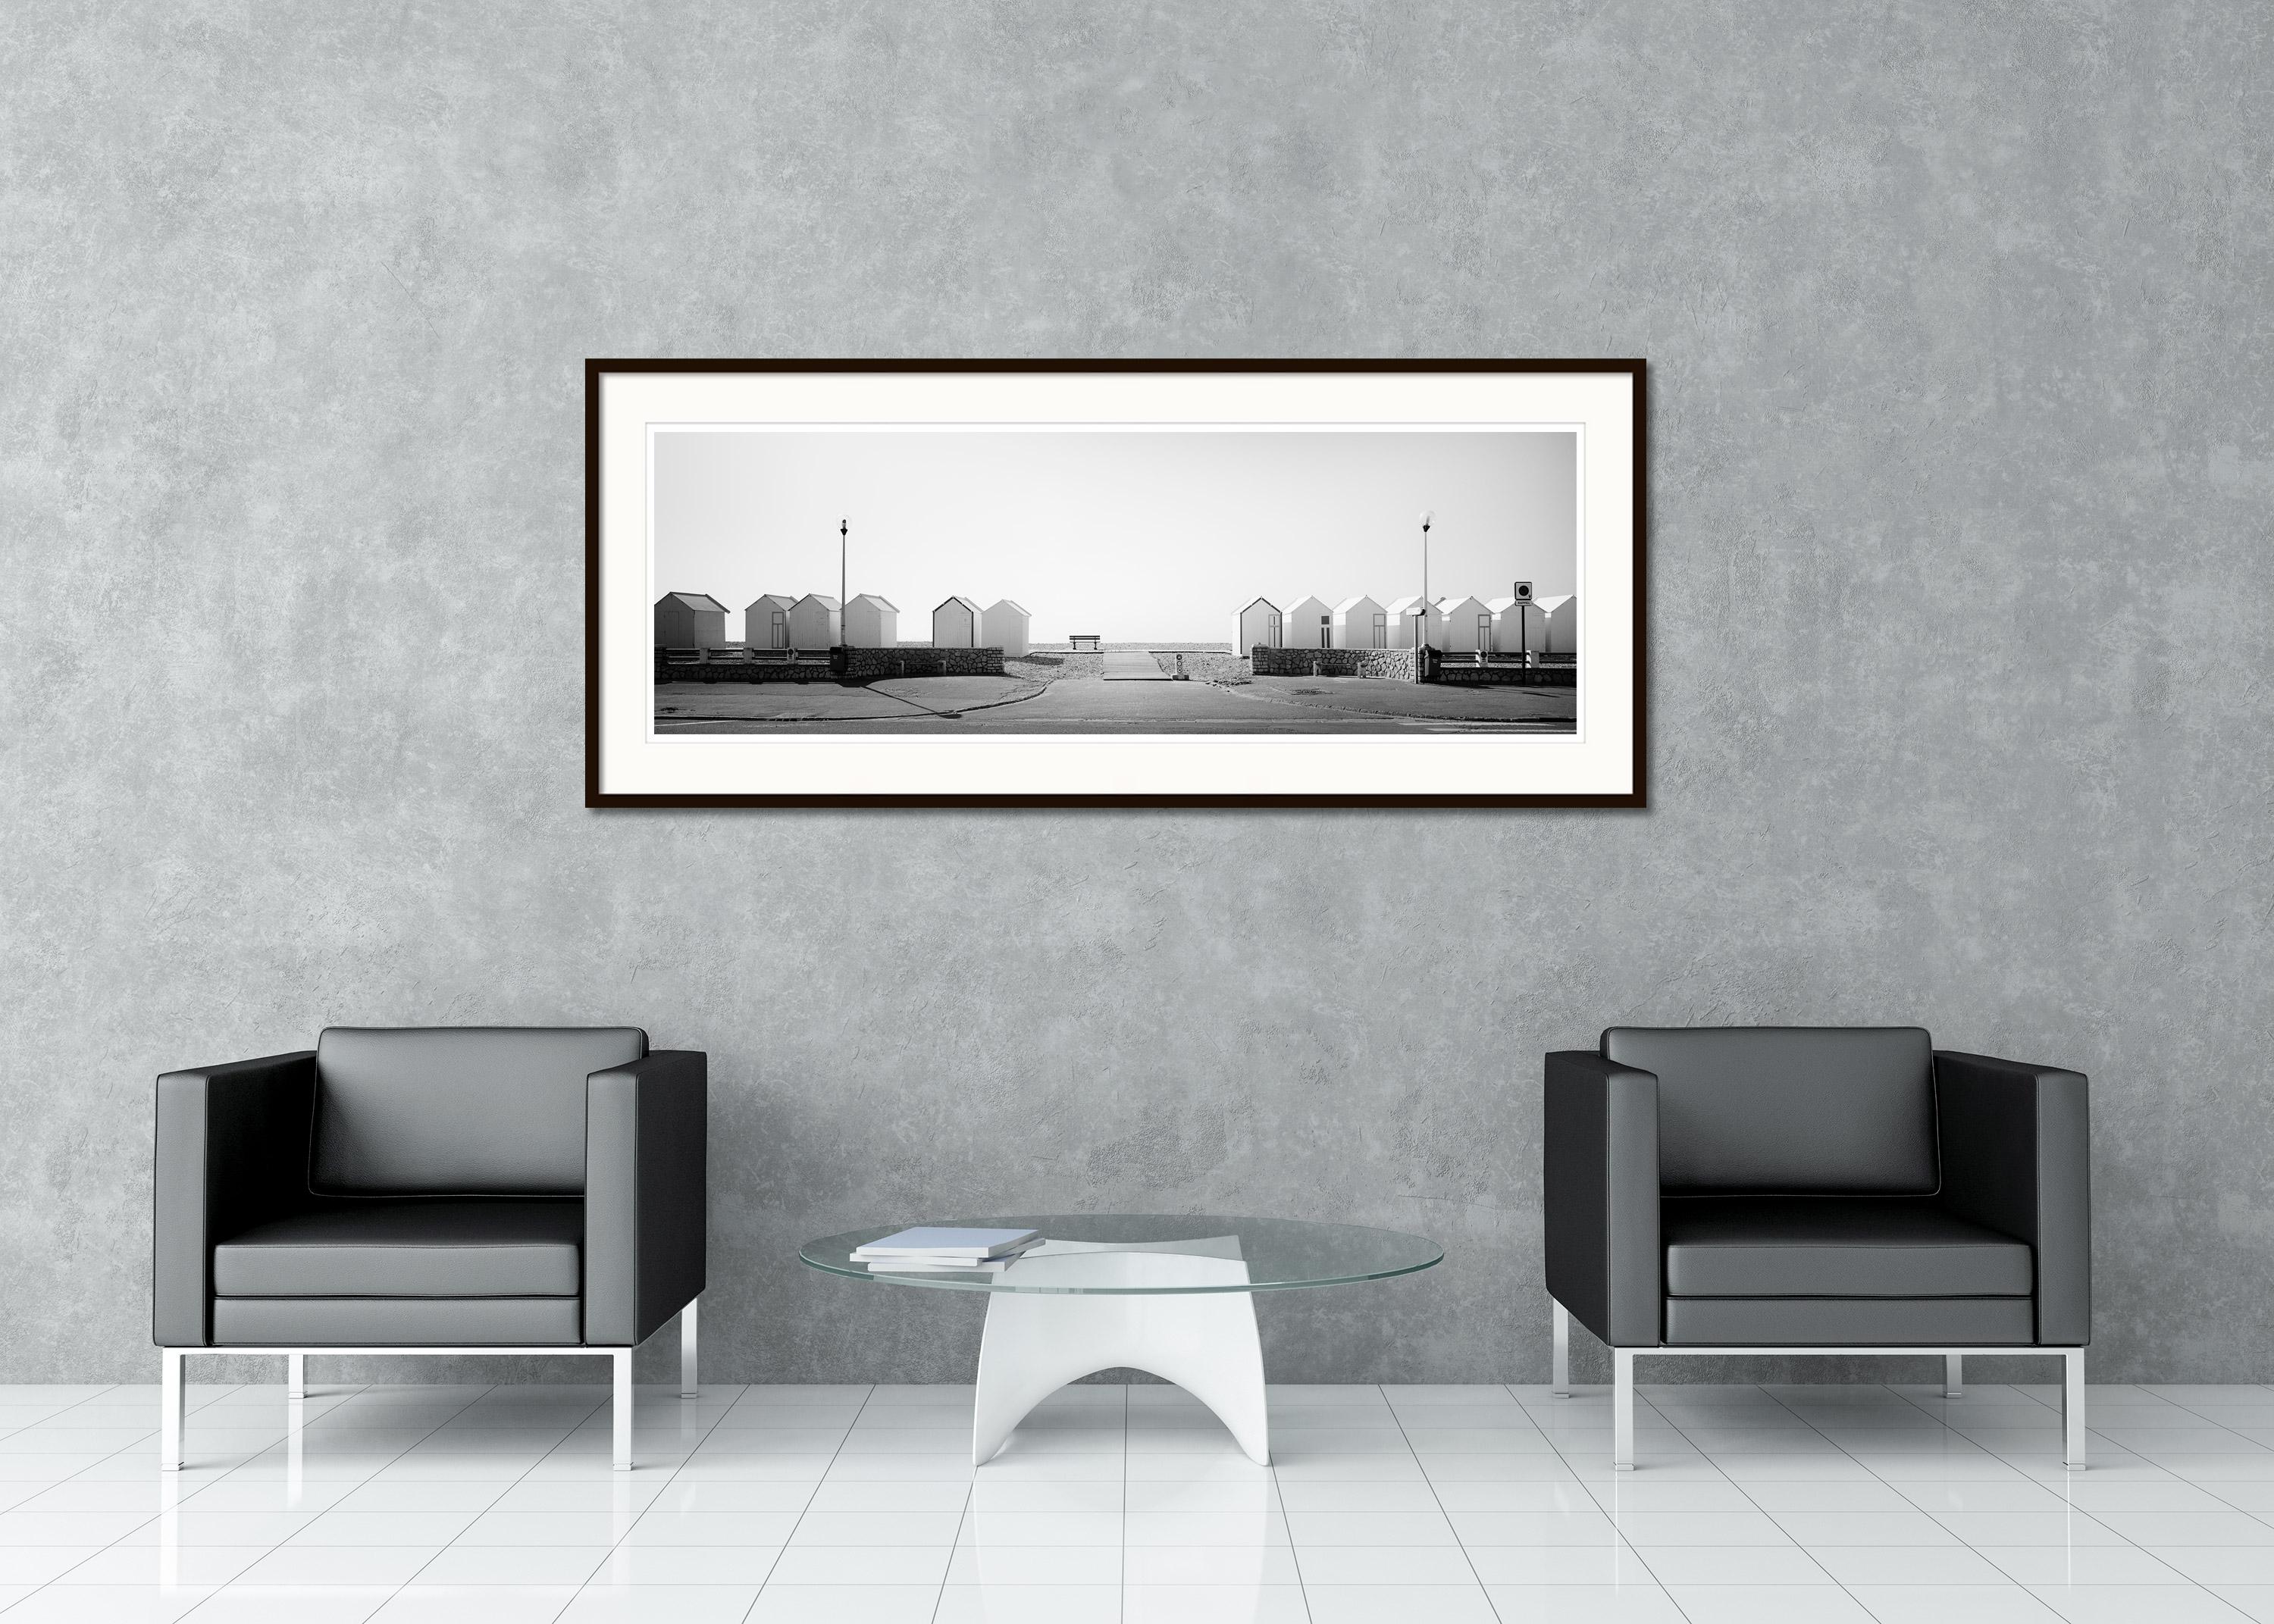 Black and white fine art panorama landscape photography. Archival pigment ink print as part of a limited edition of 7. All Gerald Berghammer prints are made to order in limited editions on Hahnemuehle Photo Rag Baryta. Each print is stamped on the